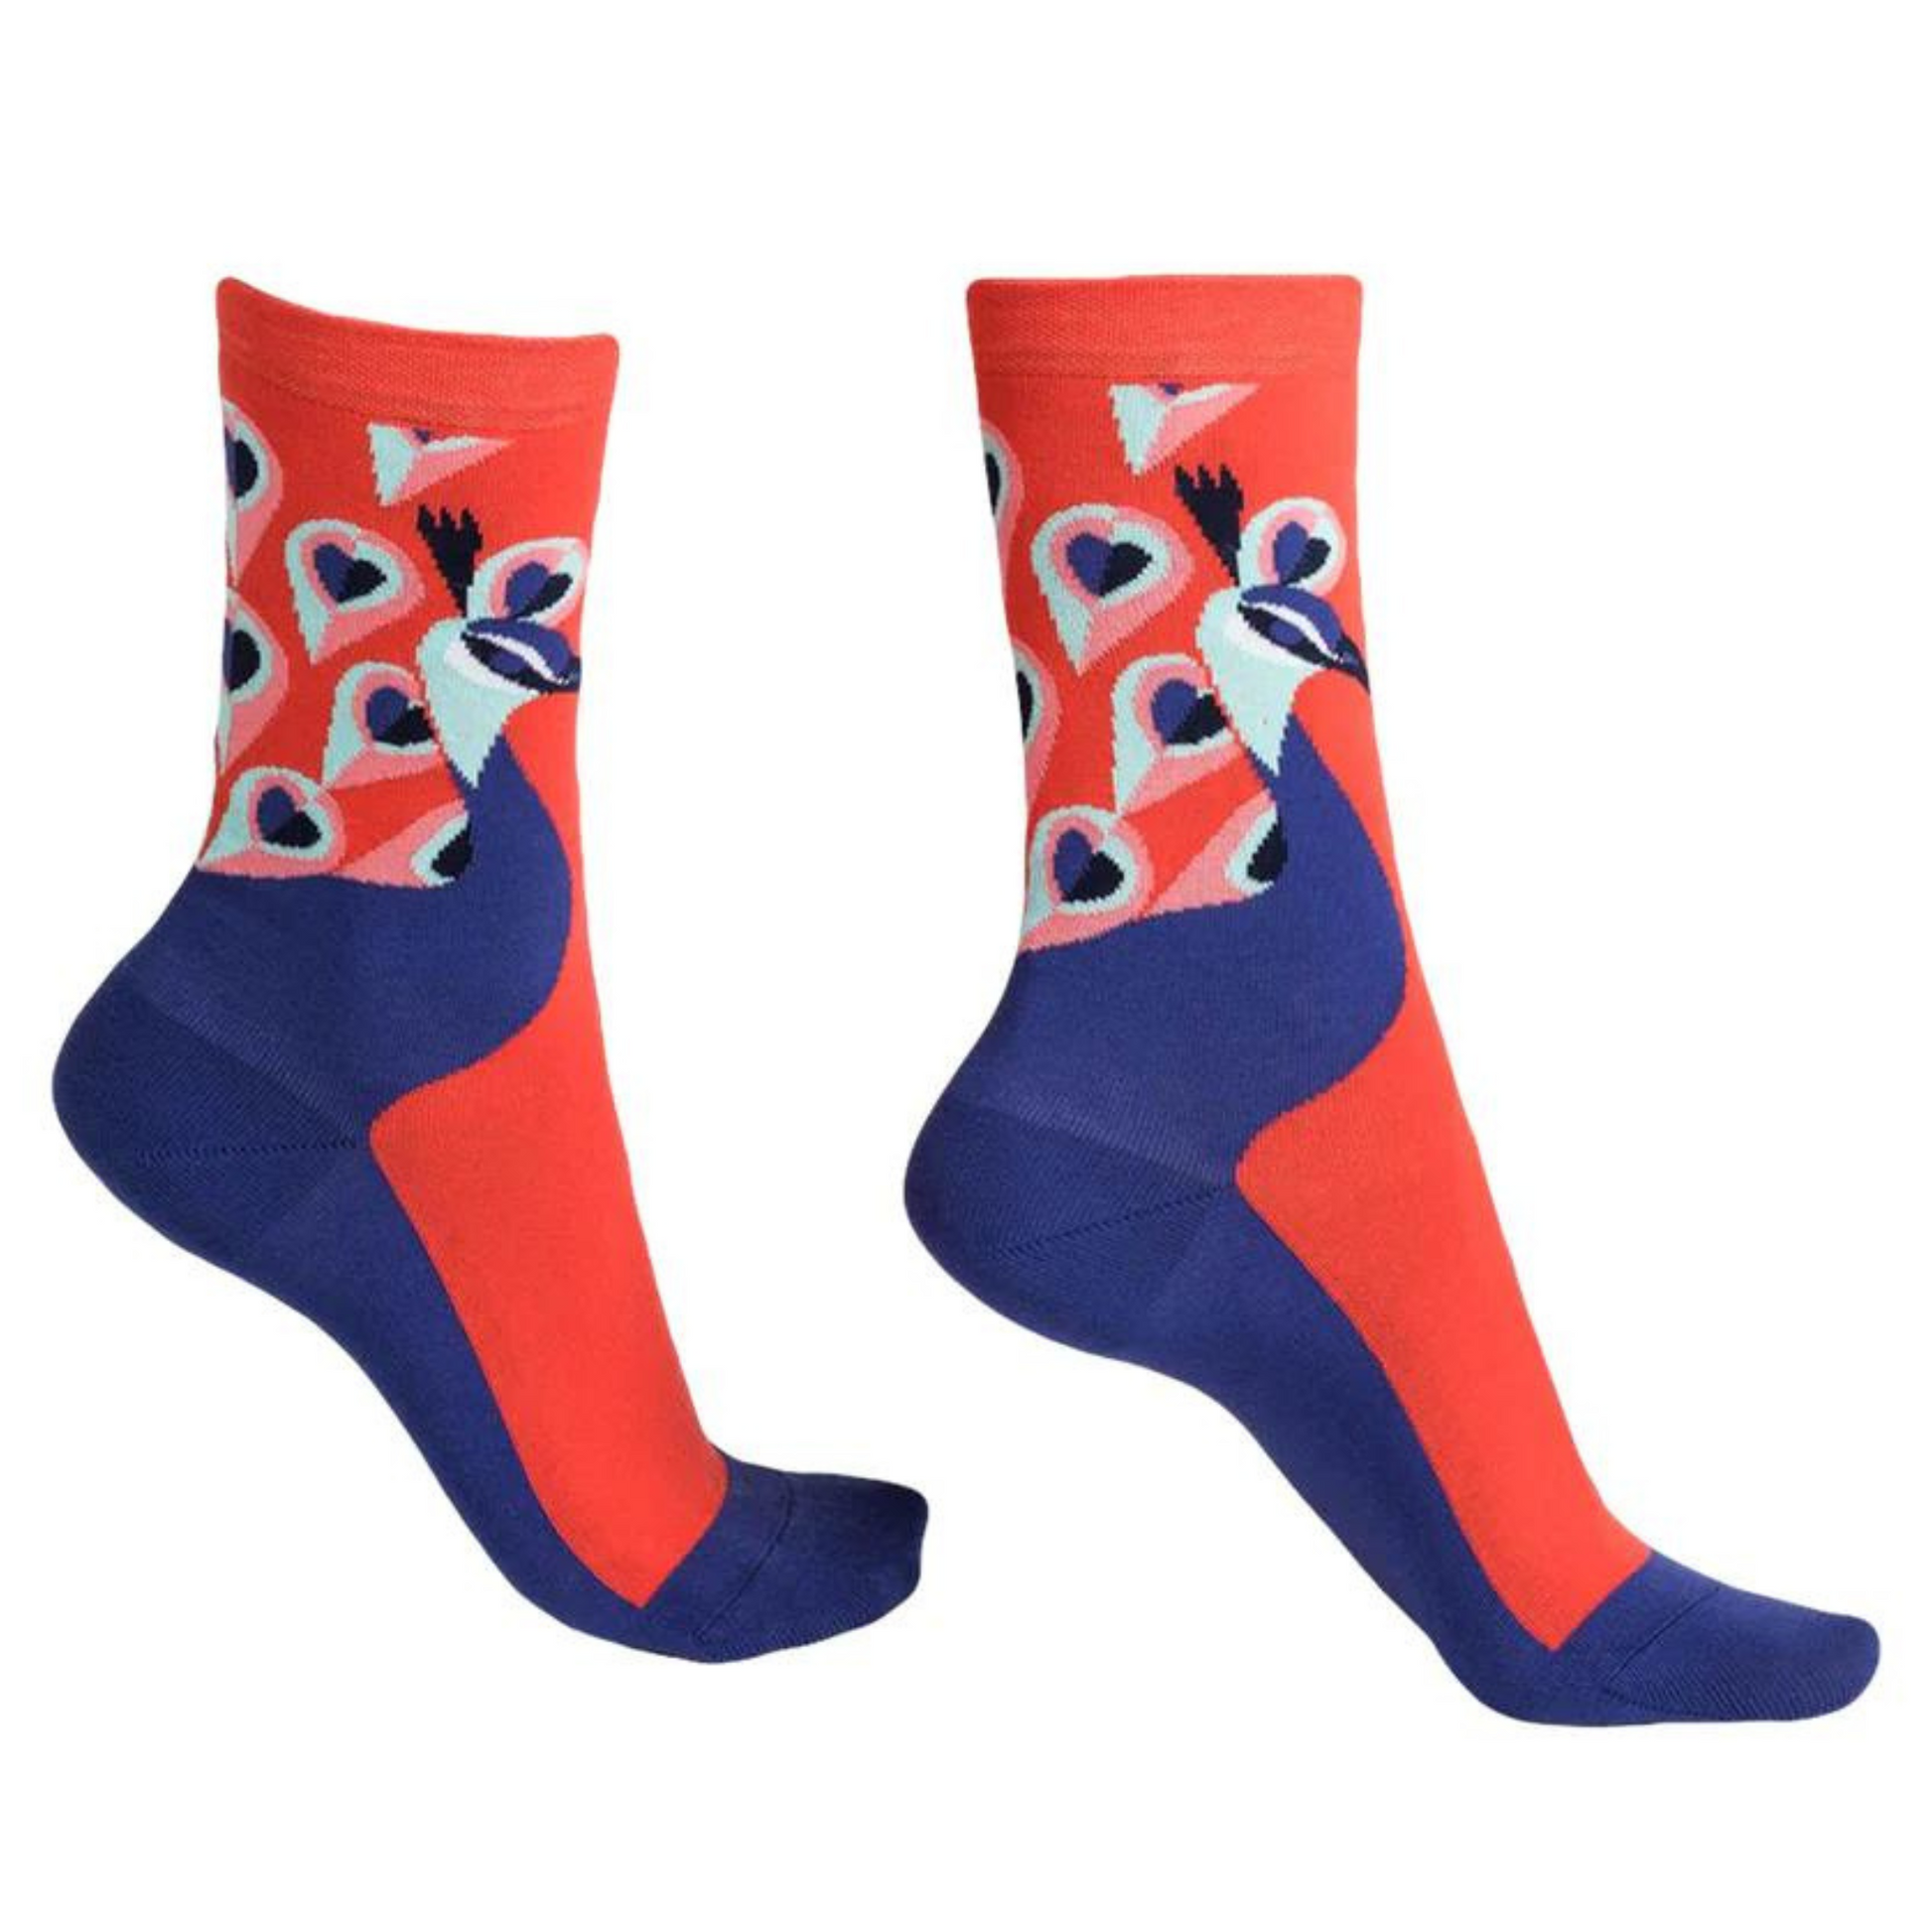 A blue and fiery red sock is pictured with a peacock print along the ankle and sole.